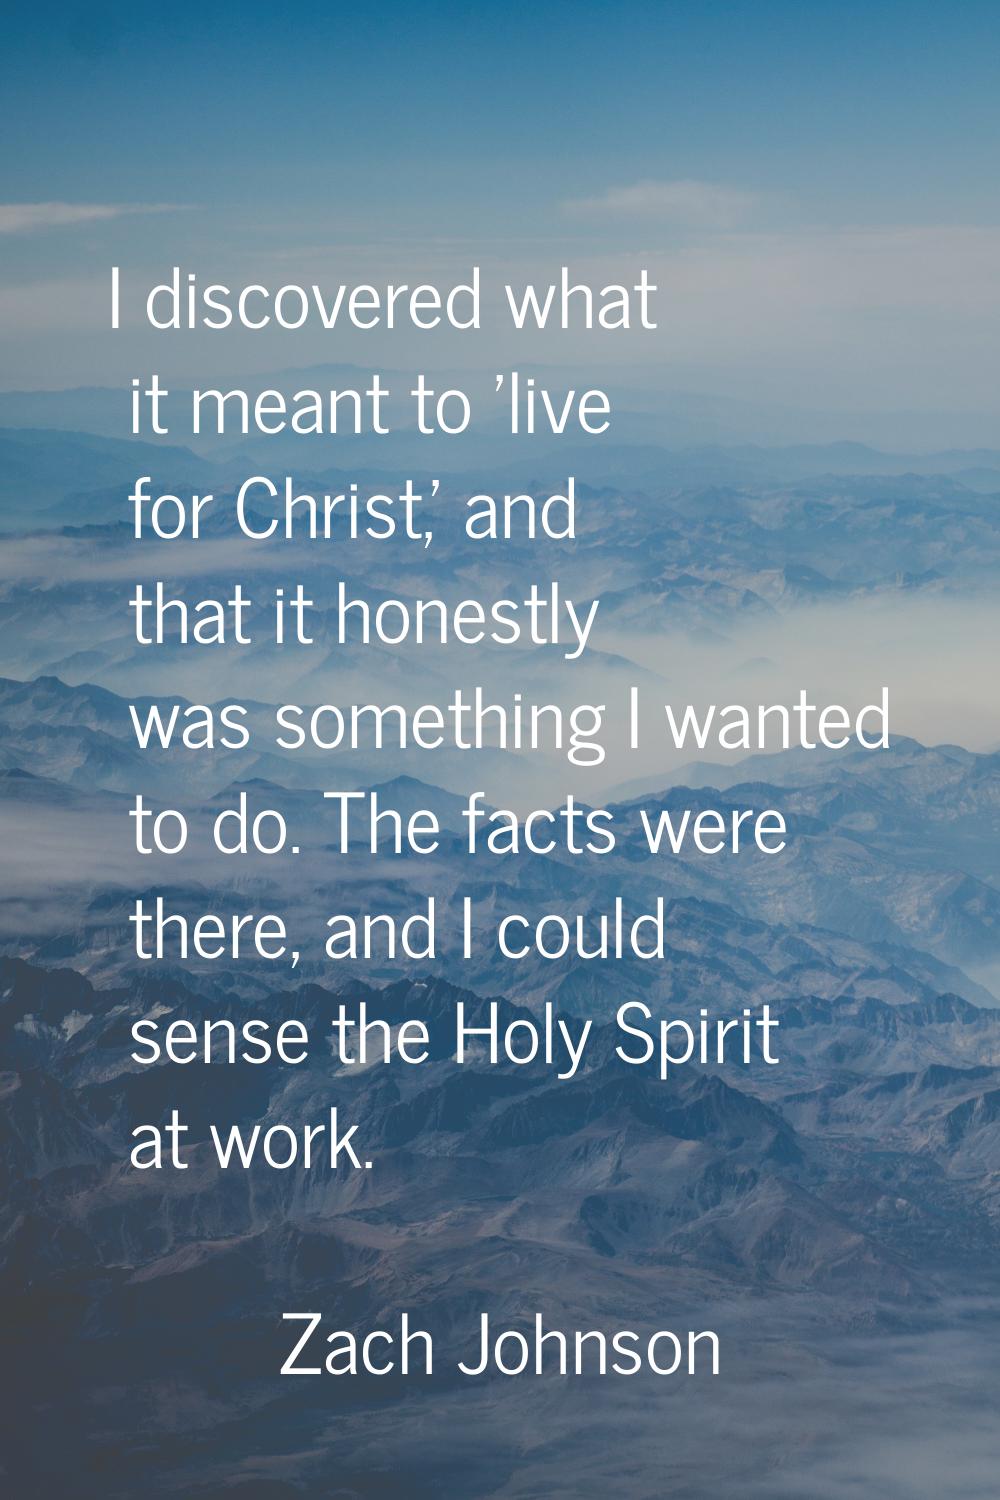 I discovered what it meant to 'live for Christ,' and that it honestly was something I wanted to do.